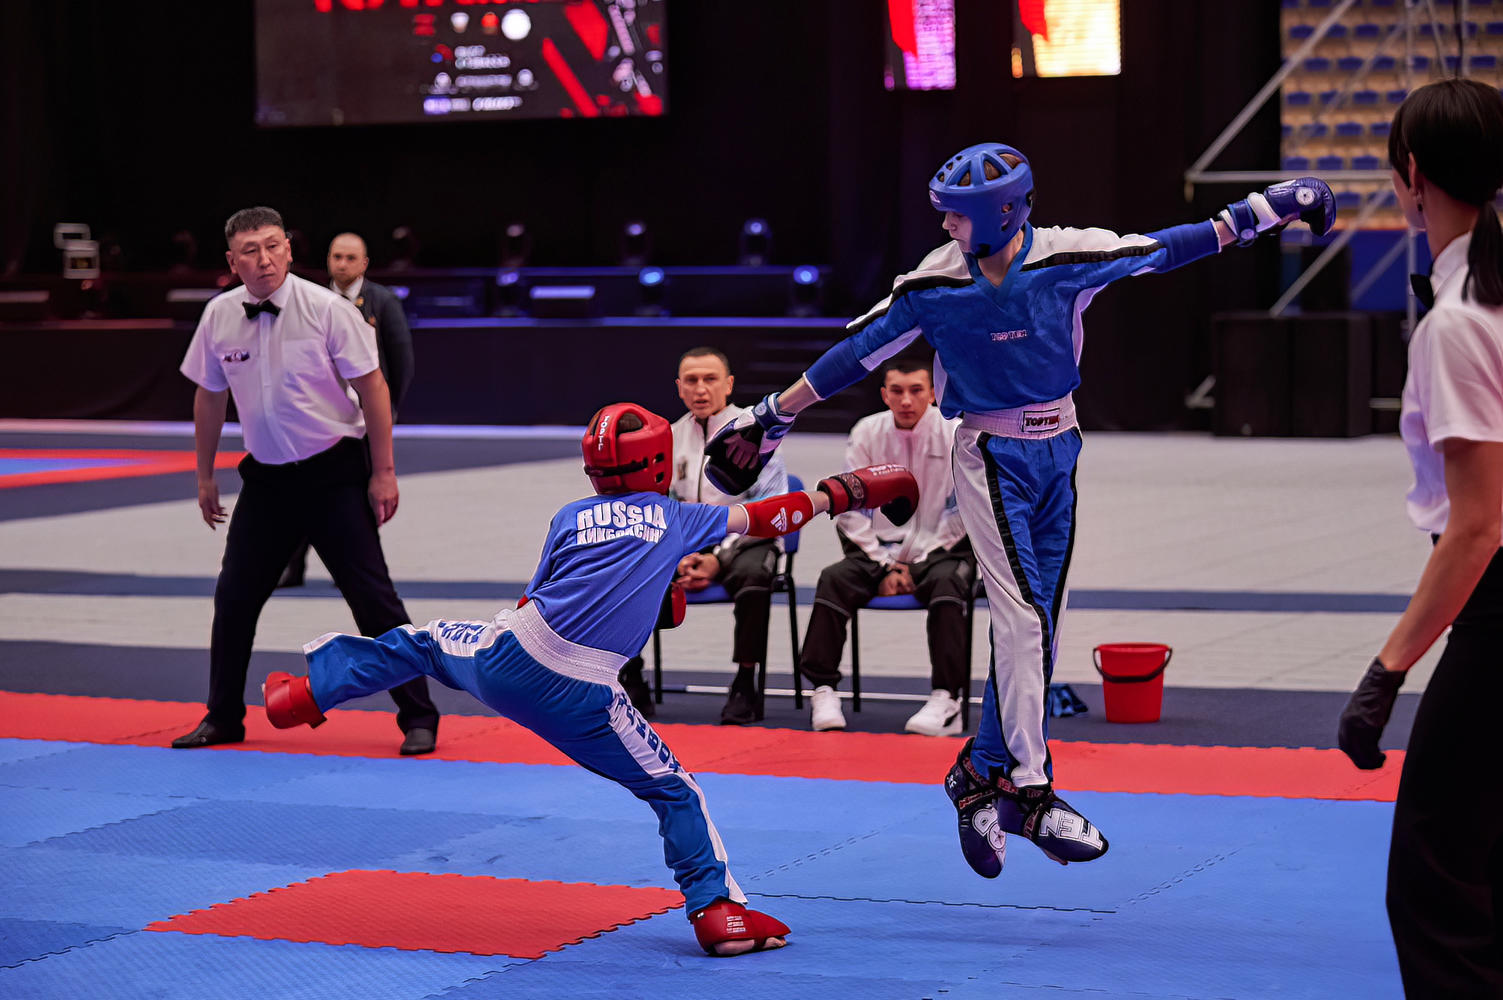 Russian championship in all disciplines of kickboxing started in Kuzbass